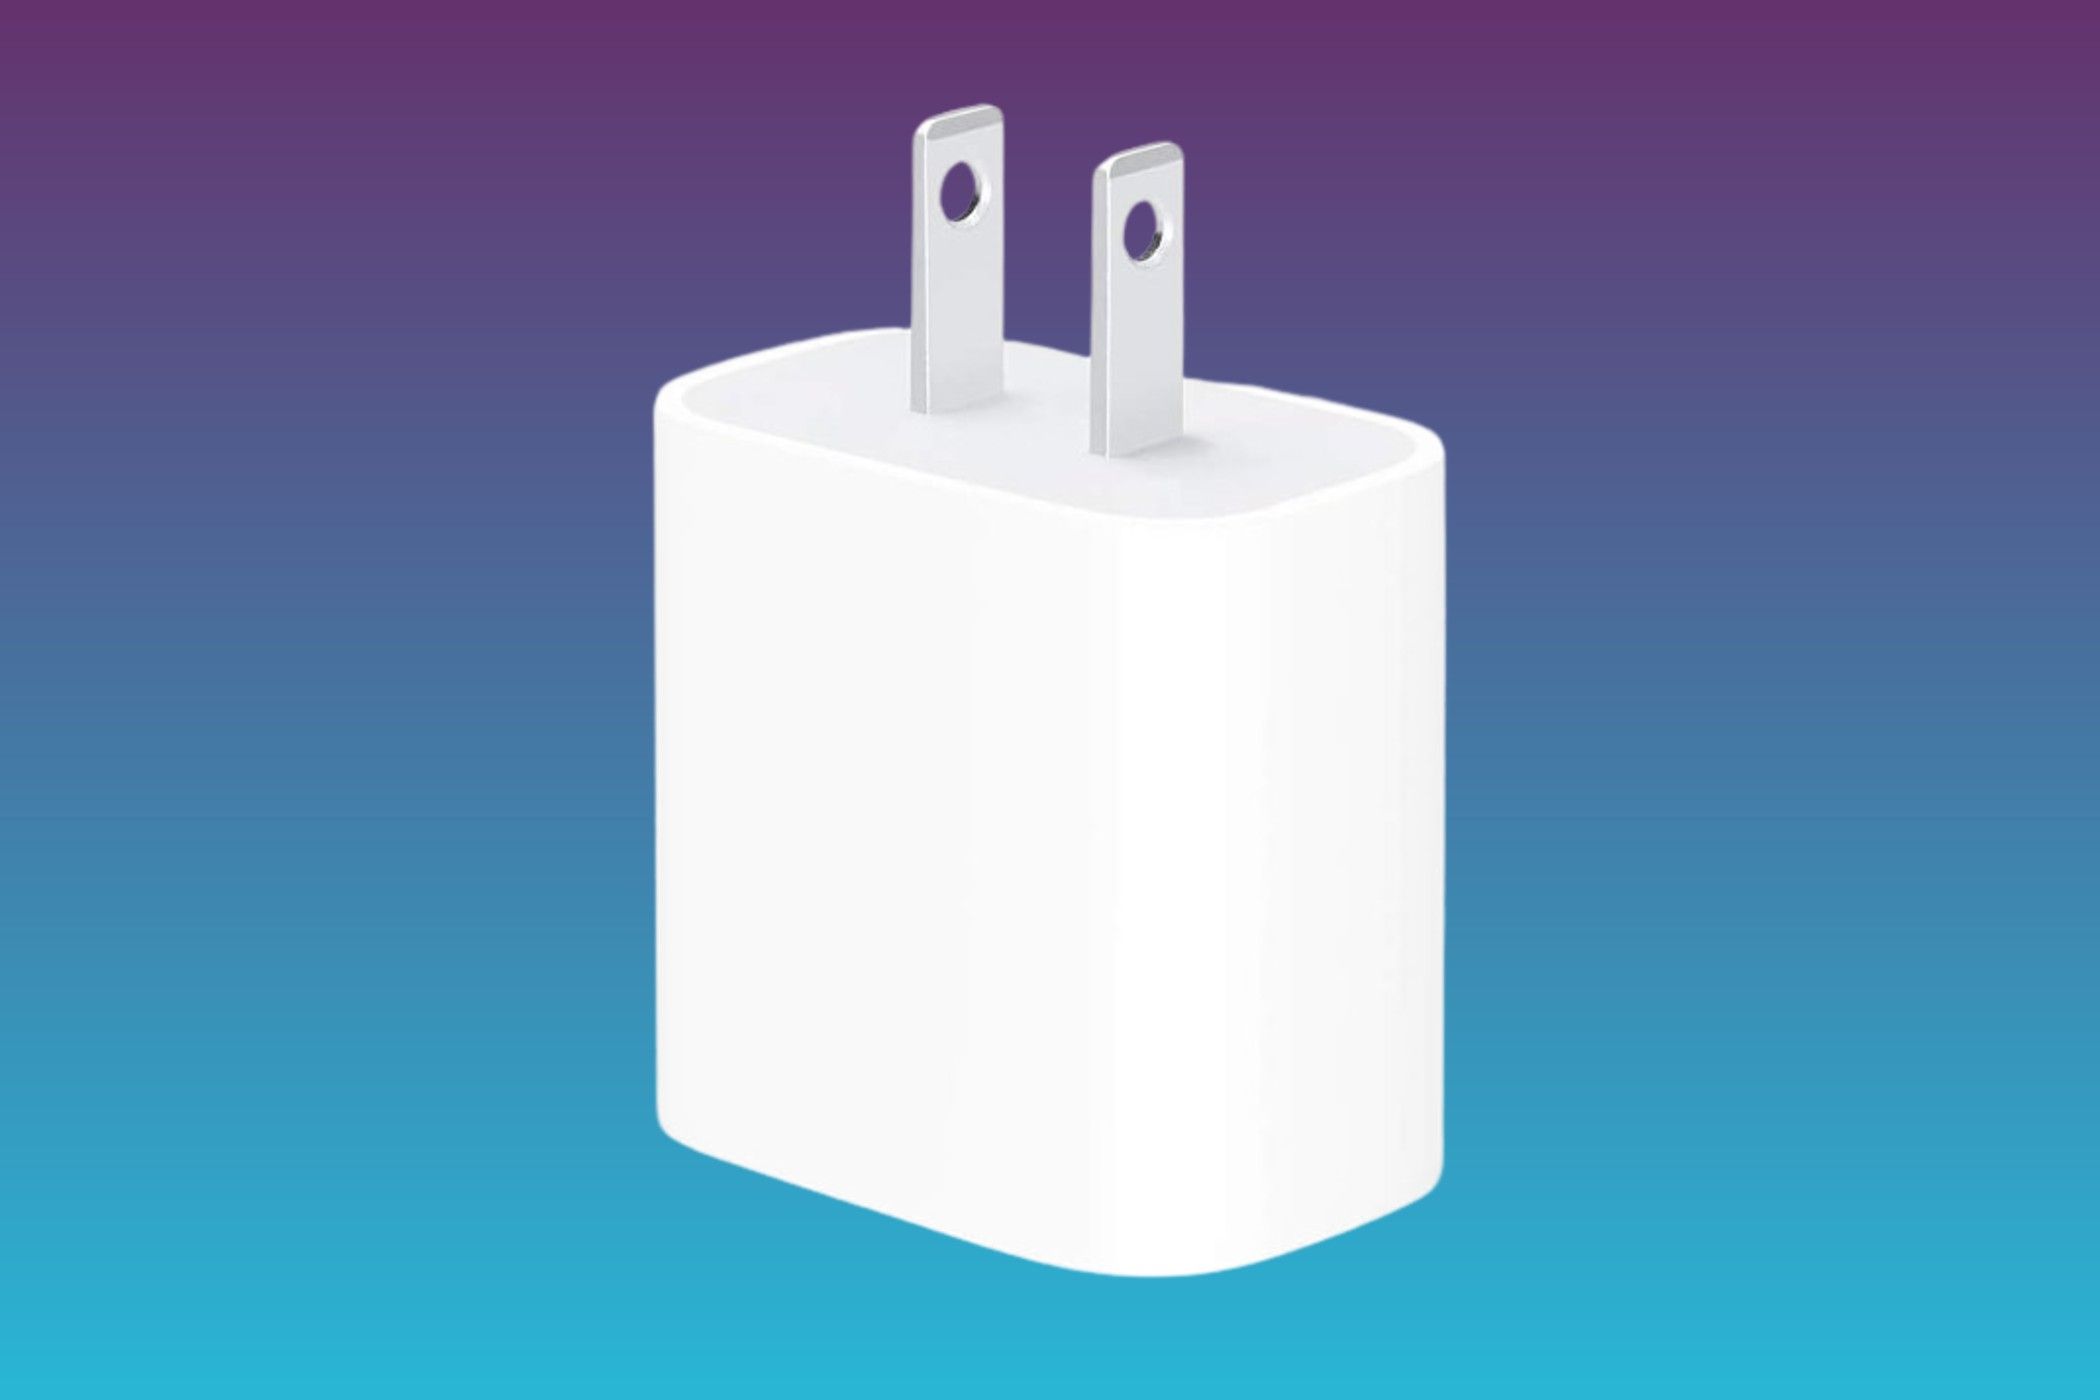 Apple 20W Wall Adapter on gradient background